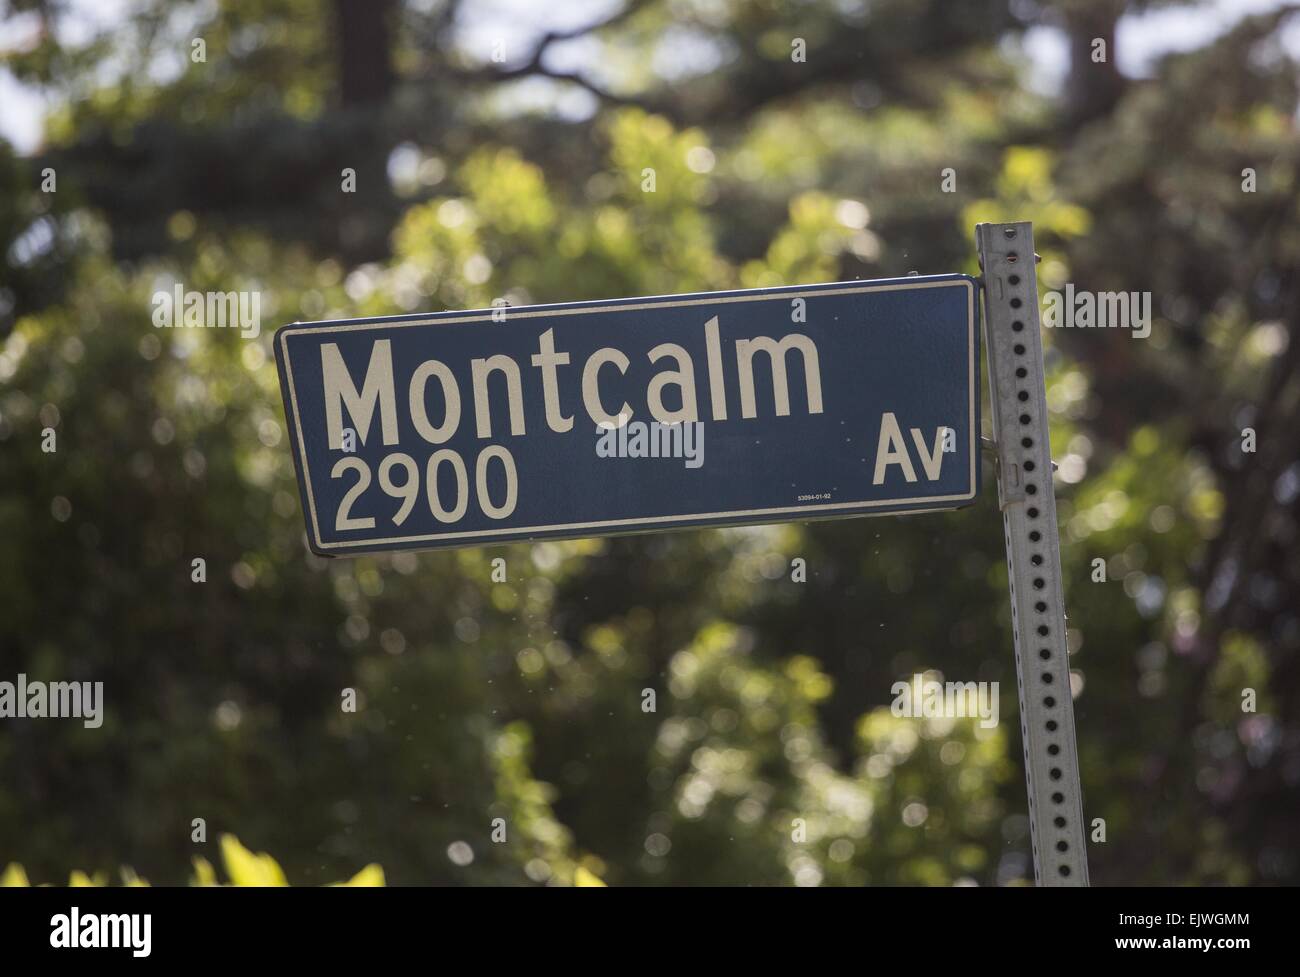 Los Angeles, California, USA. 1st Apr, 2015. A street sign is seen near the home of Andrew Getty on Wednesday April 1, 2014 in Los Angeles. Getty, the 47-year-old, grandson of the late oil baron J. Paul Getty, who was found dead at his Hollywood Hills home, suffered from a serious medical condition that put him at ''grave risk of substantial and irreparable injury or death'' if his blood pressure were to suddenly rise, according to court papers obtained today. © Ringo Chiu/ZUMA Wire/Alamy Live News Stock Photo